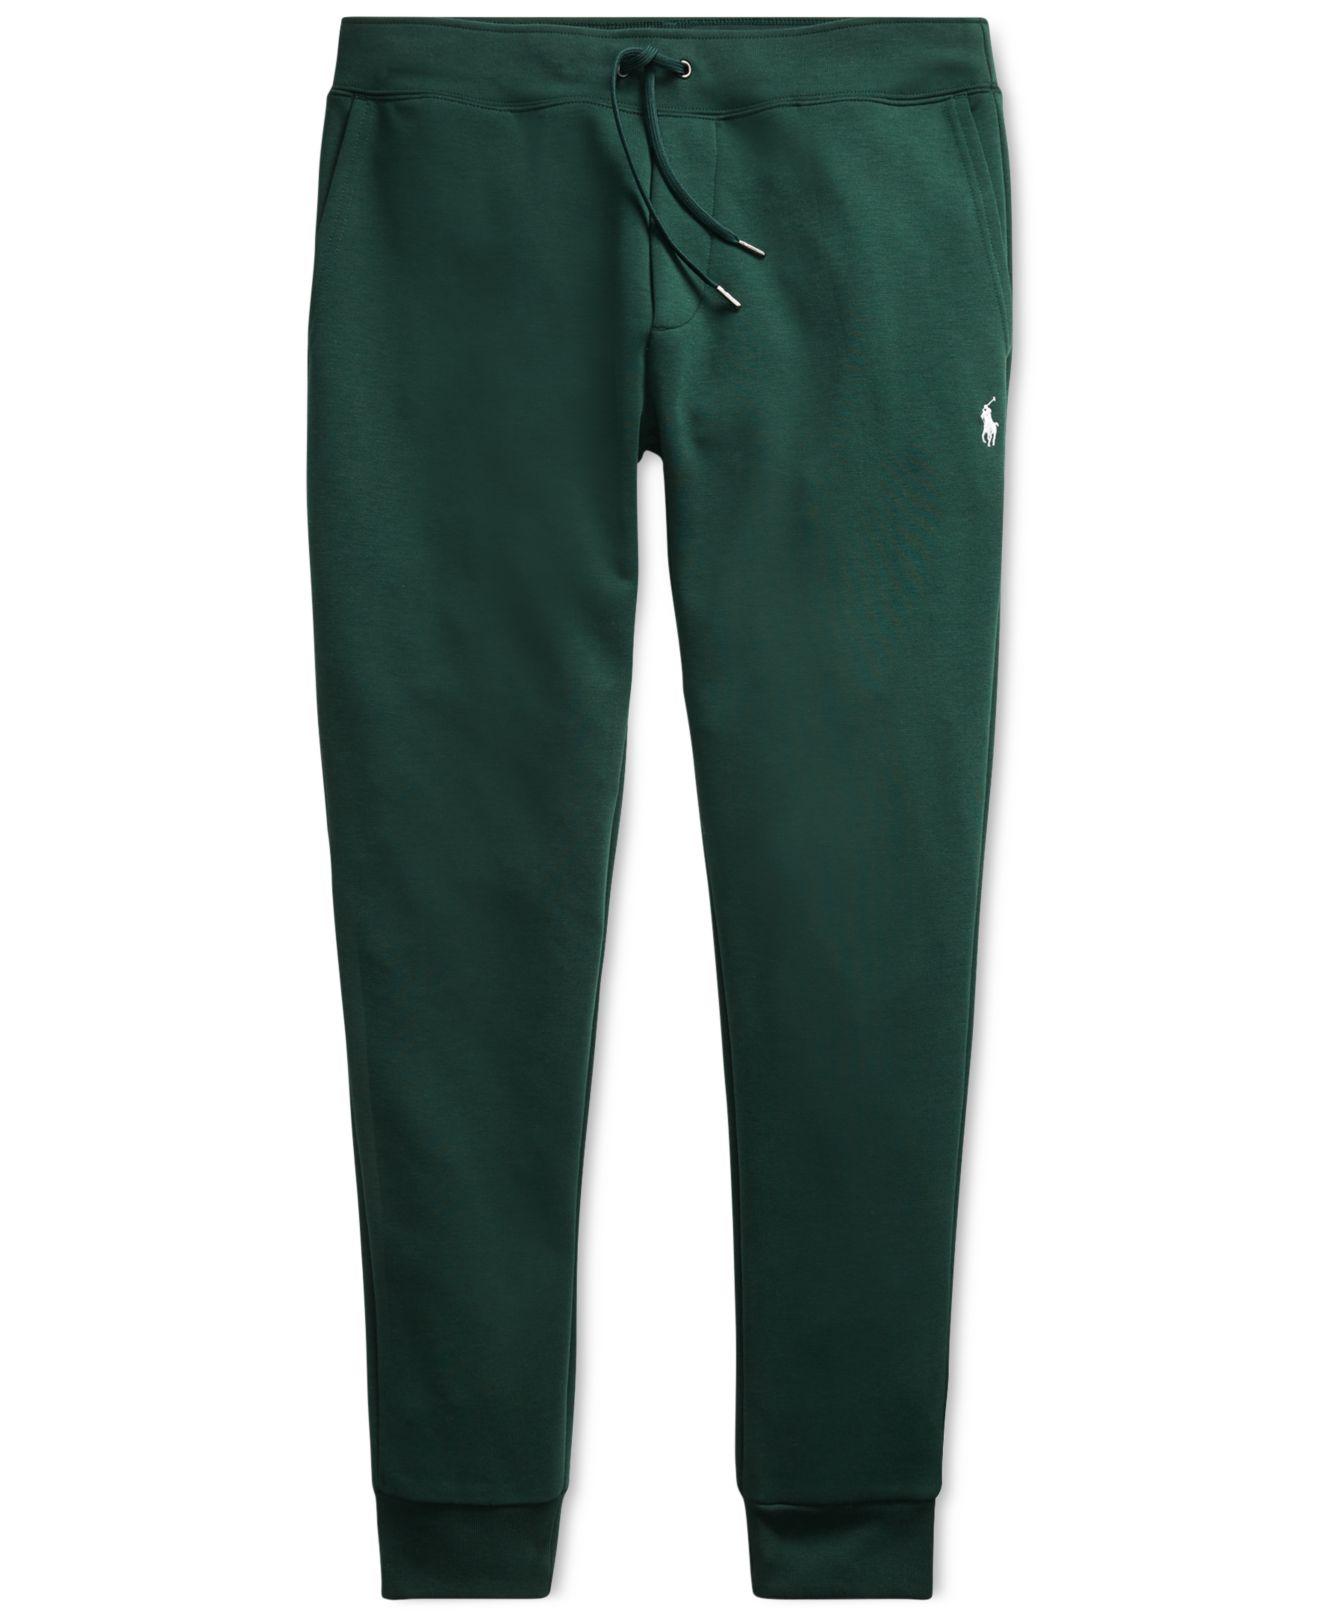 Polo Ralph Lauren Synthetic Big & Tall Double-knit Tech Jogger Pants in  Green for Men - Lyst